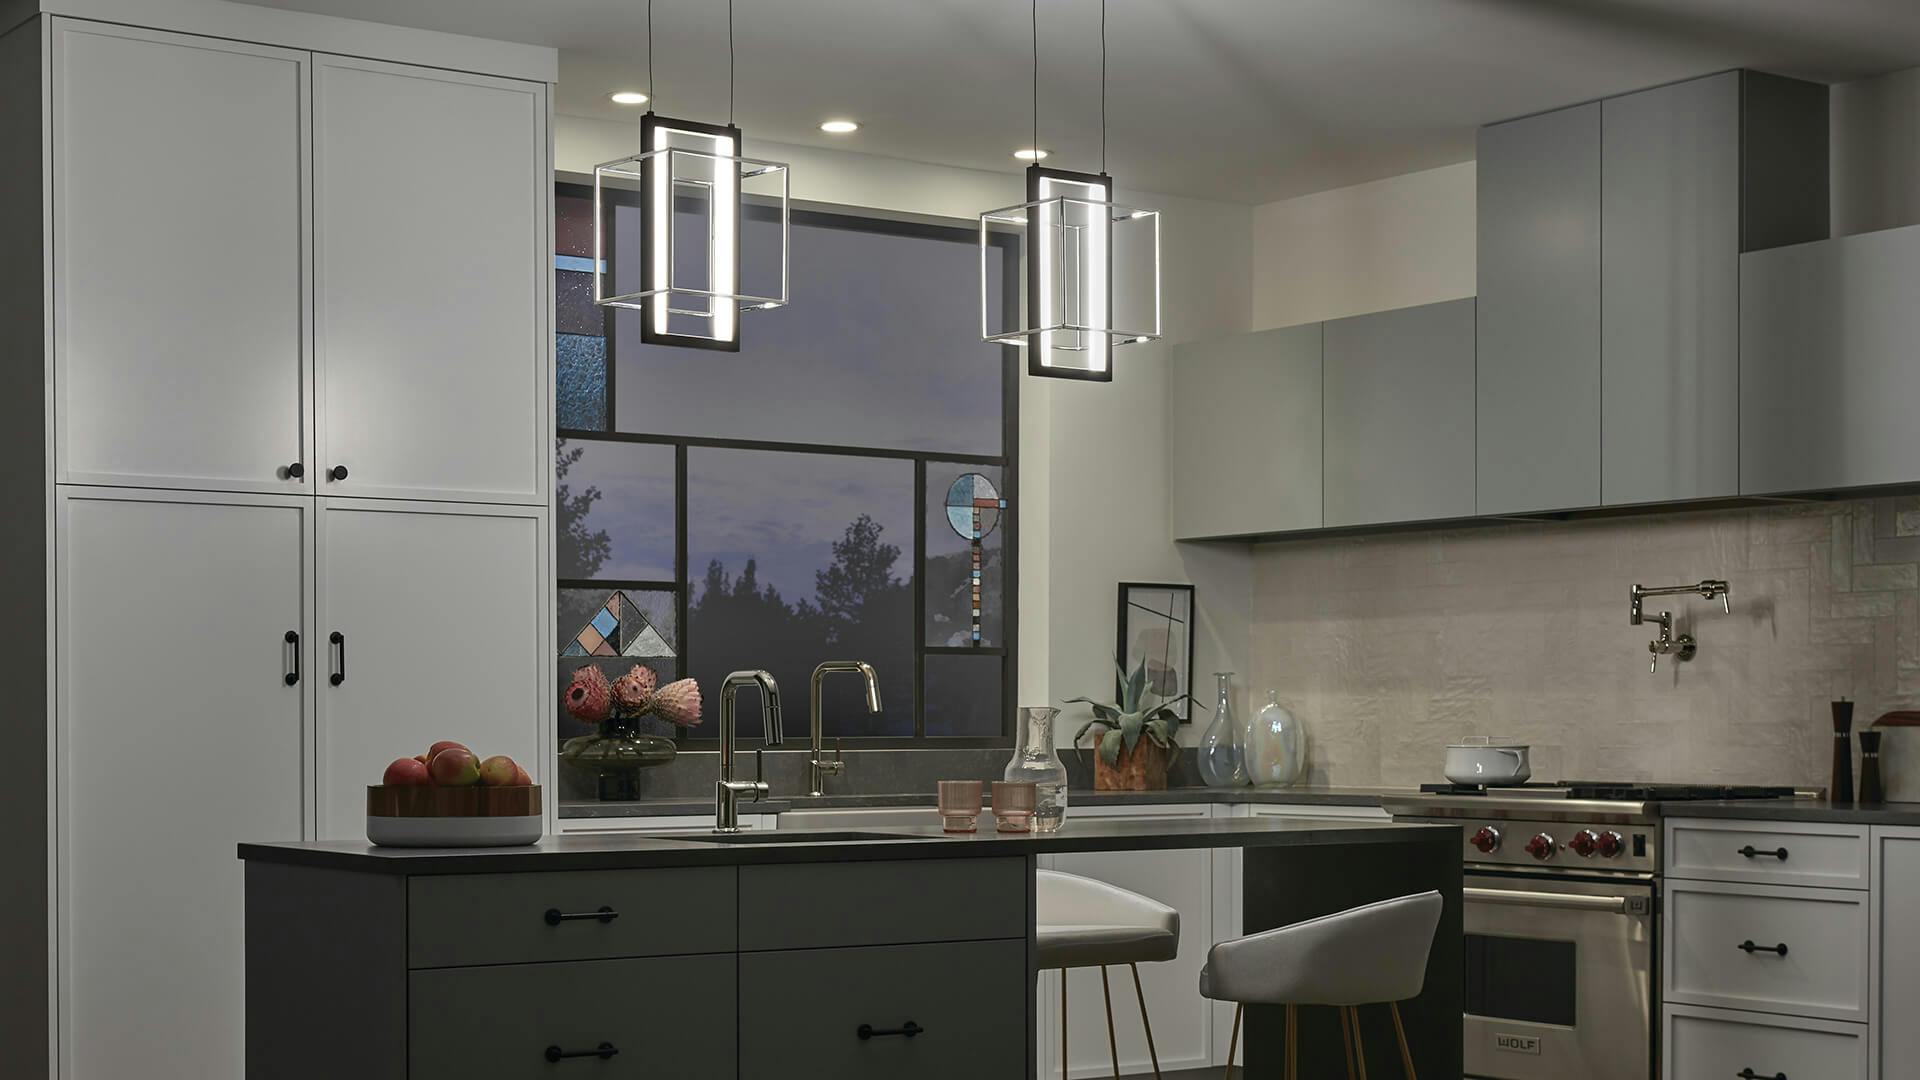 Modern kitchen at night with two Viho pendant lights hanging above a kitchen island